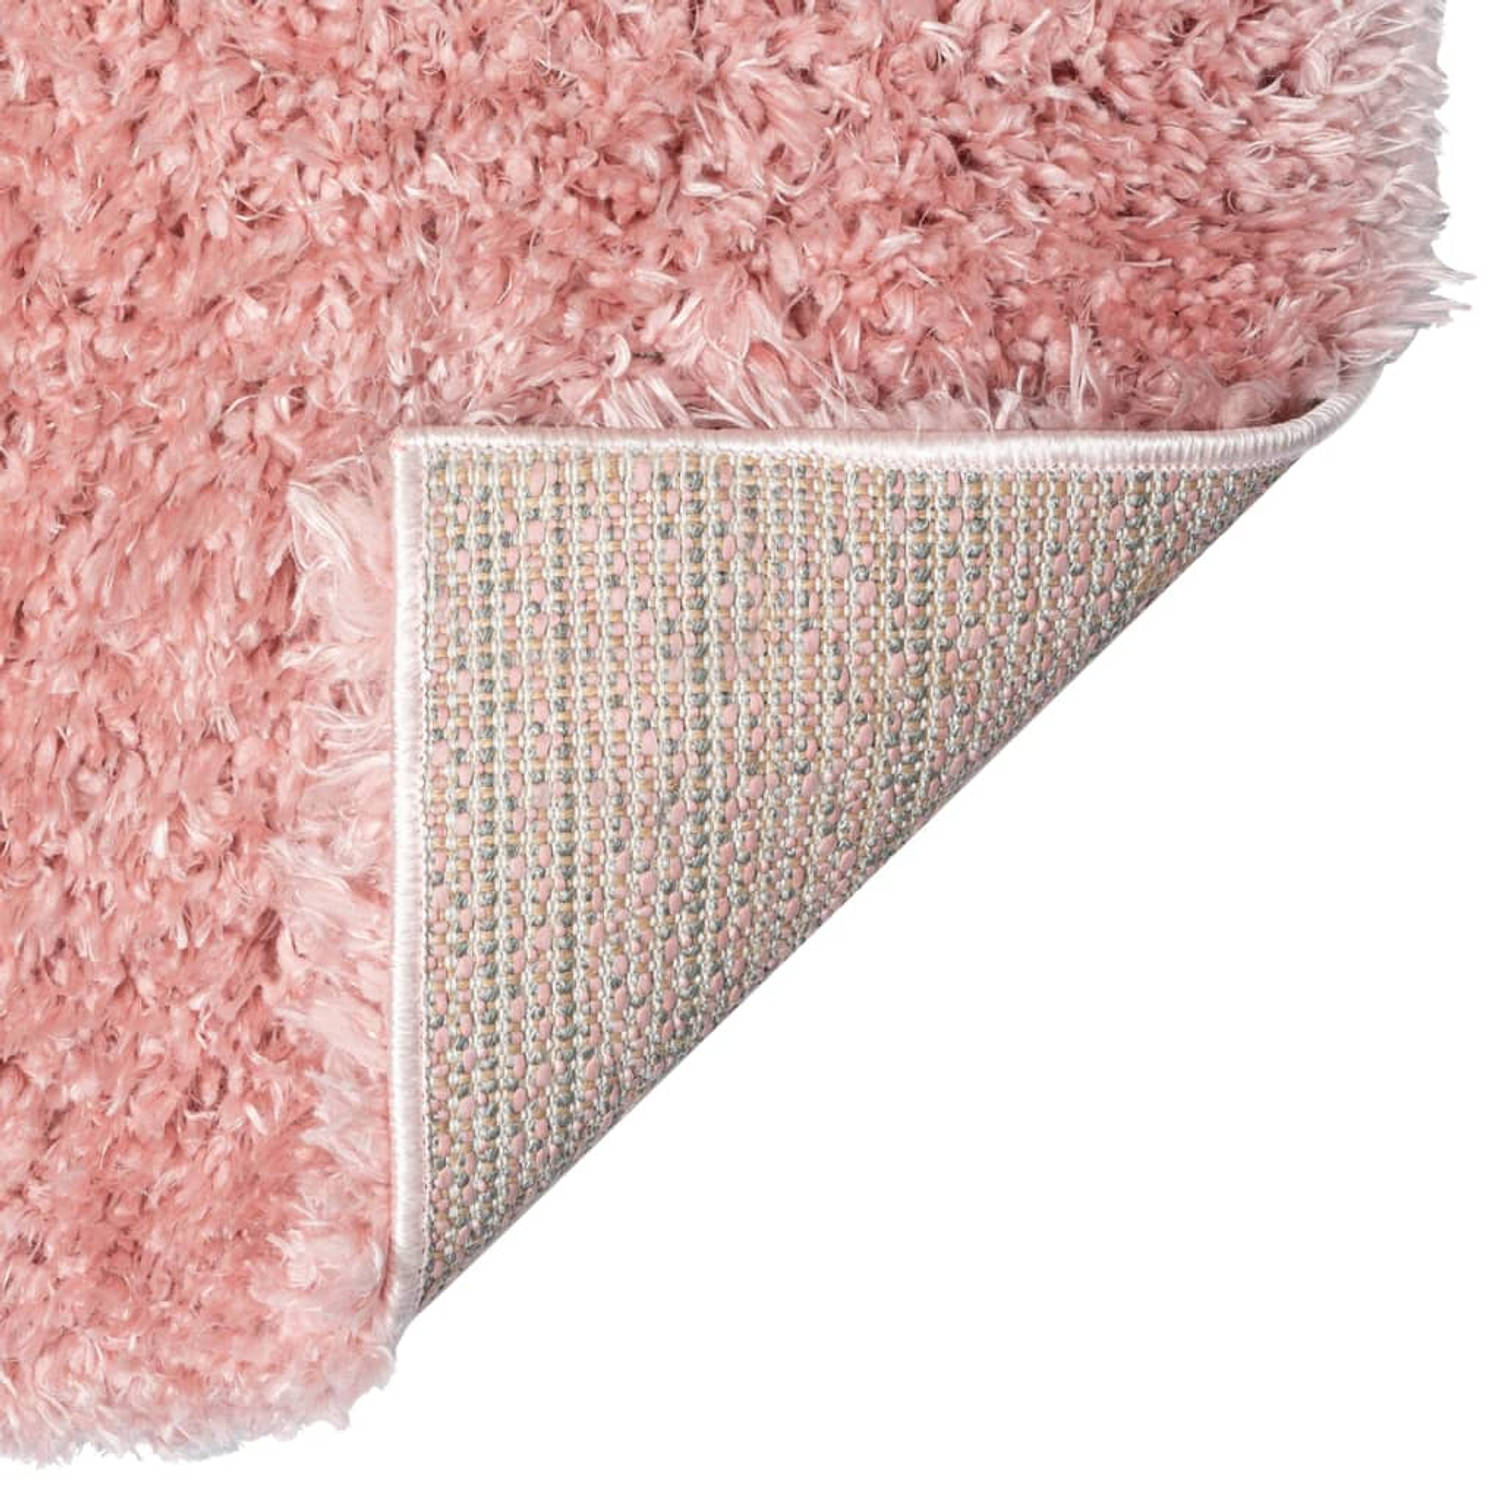 The Living Store Shaggy Tapijt Roze 160 x 230 cm 50 mm poolhoogte Polyester